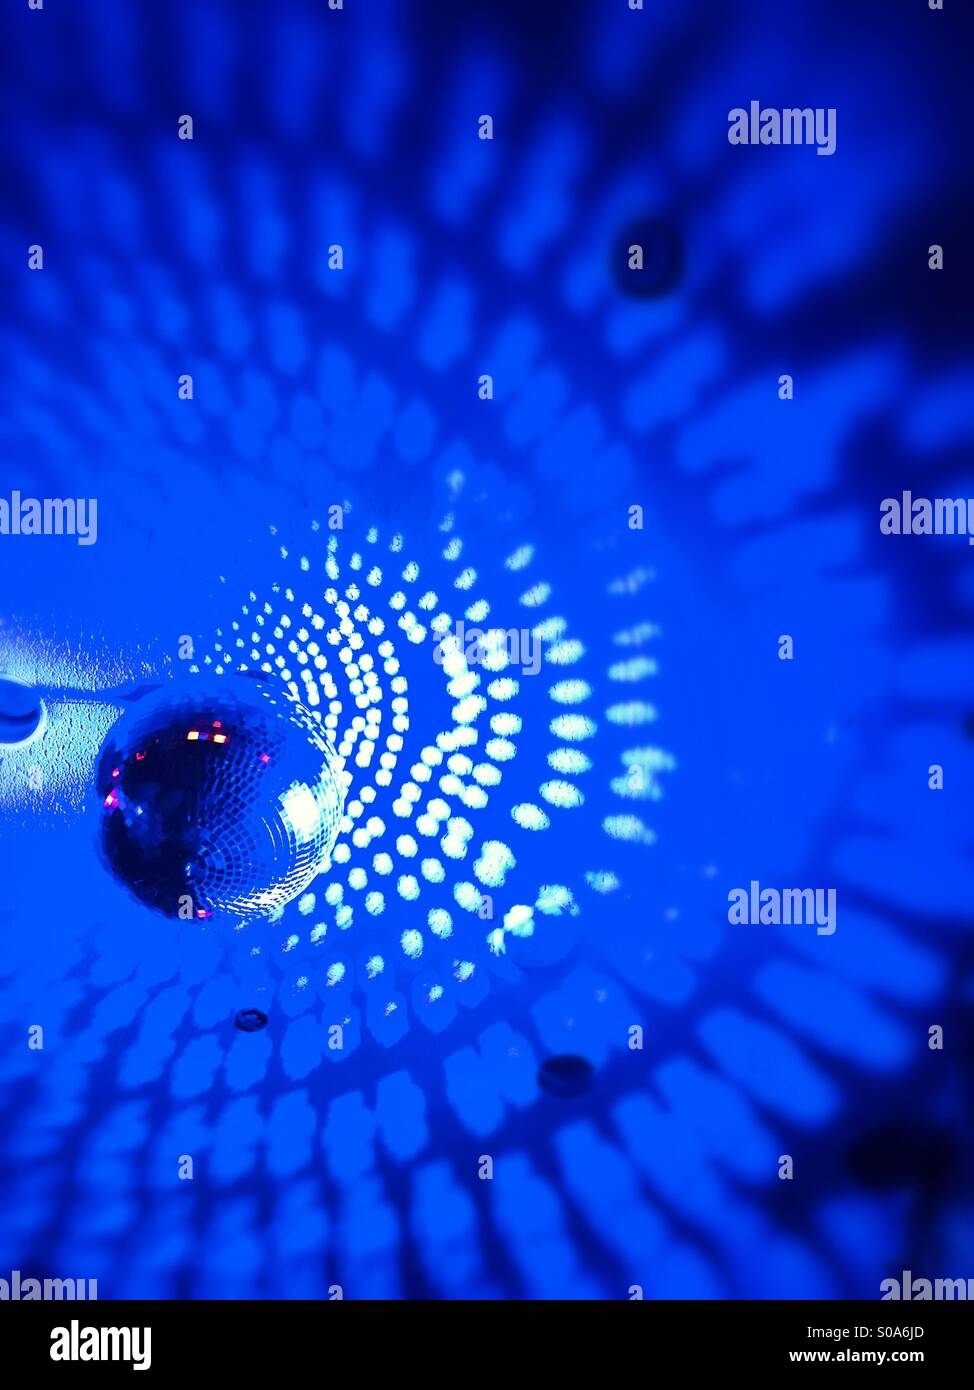 Blurred semi abstract mirrored blue disco ball and surrounding area Stock Photo